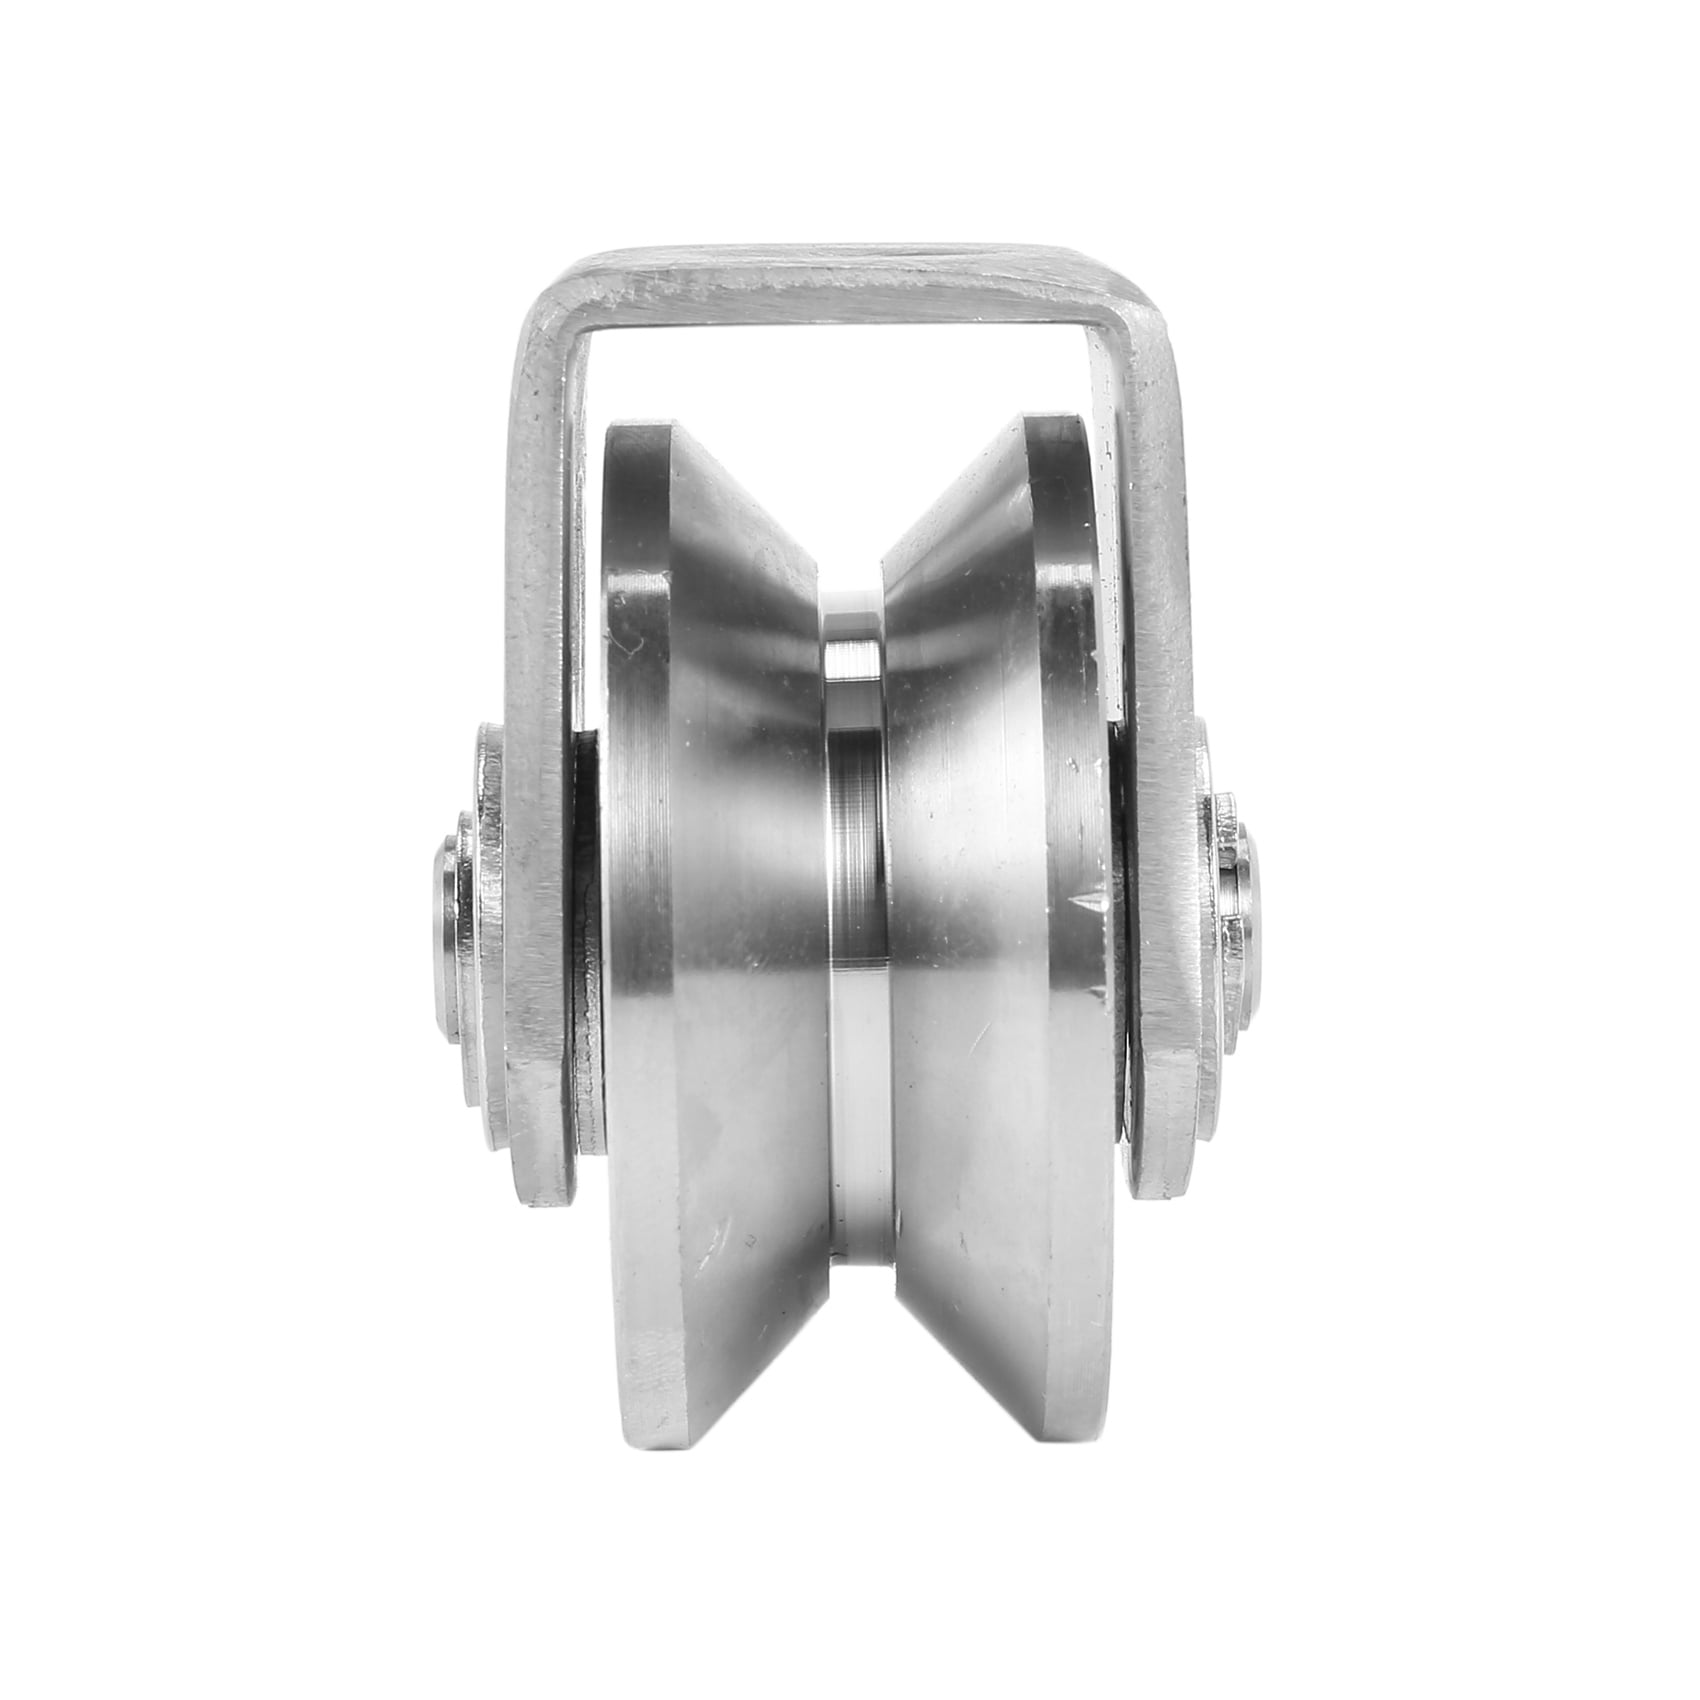 Bearing Fixed Pulley V Type Wheel Fit For Sliding Gate Track Guide Track Pulley 